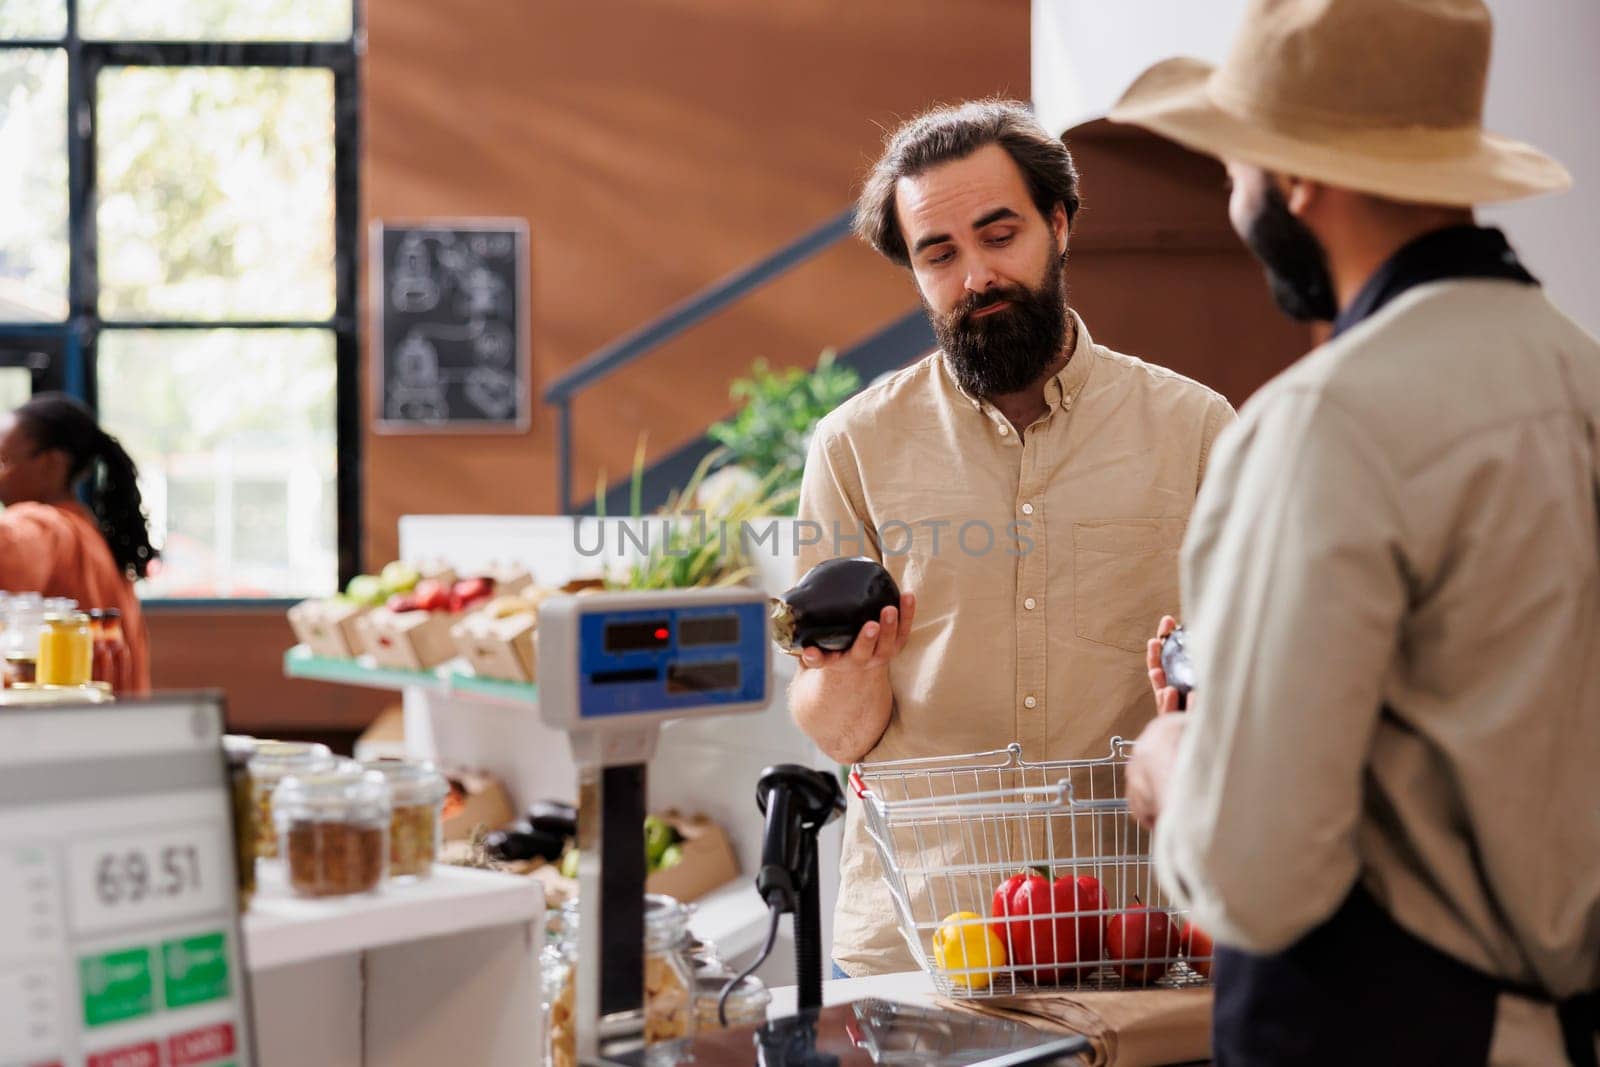 In local market, salesperson with an apron and hat assists a Caucasian shopper in purchasing fresh, eco-friendly produce. Healthy food options are plentiful, and the packaging is recyclable.